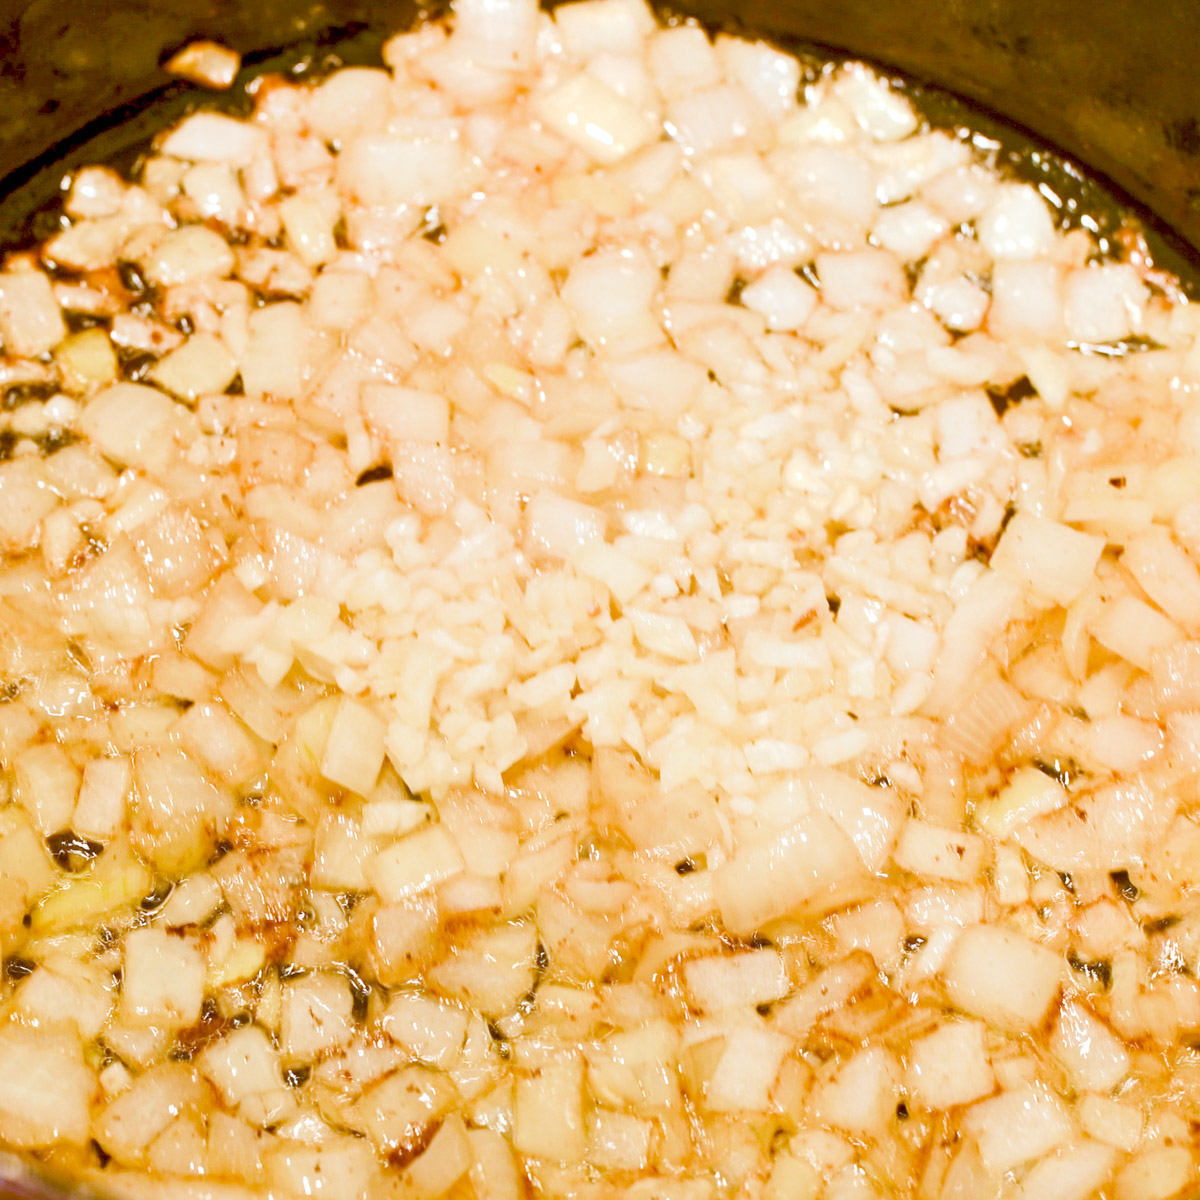 Cook the onions in the bacon grease.